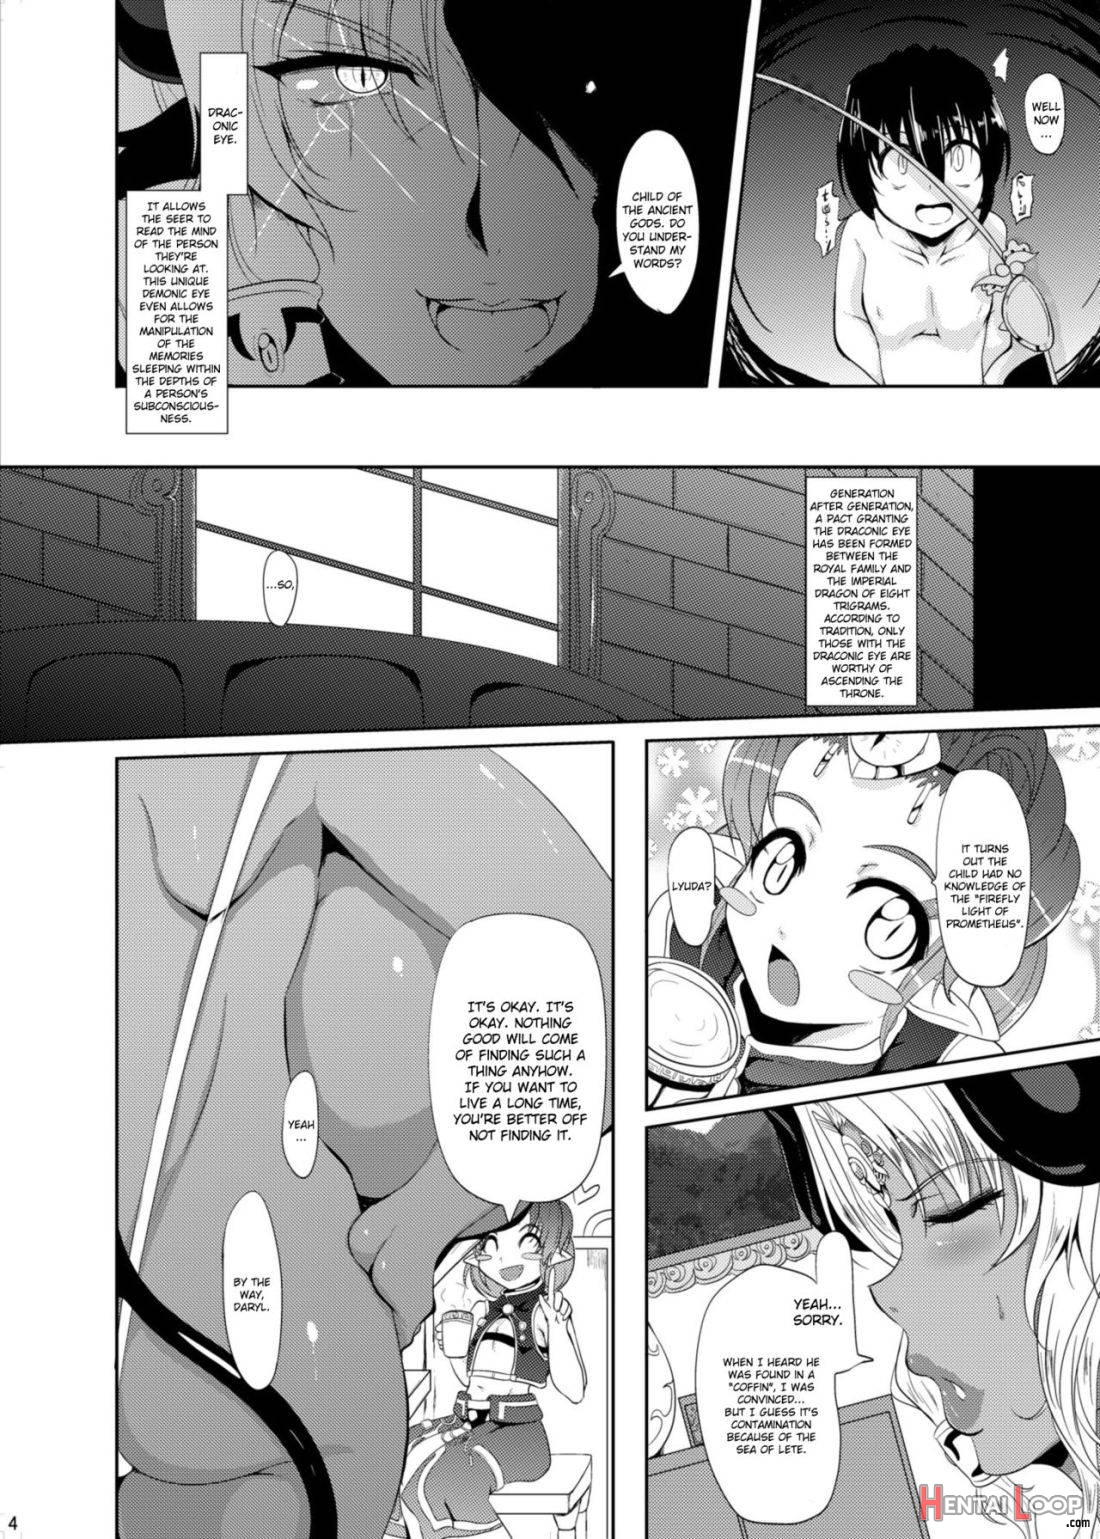 Gyu-don! 5 – Queen Of Kingdom page 3